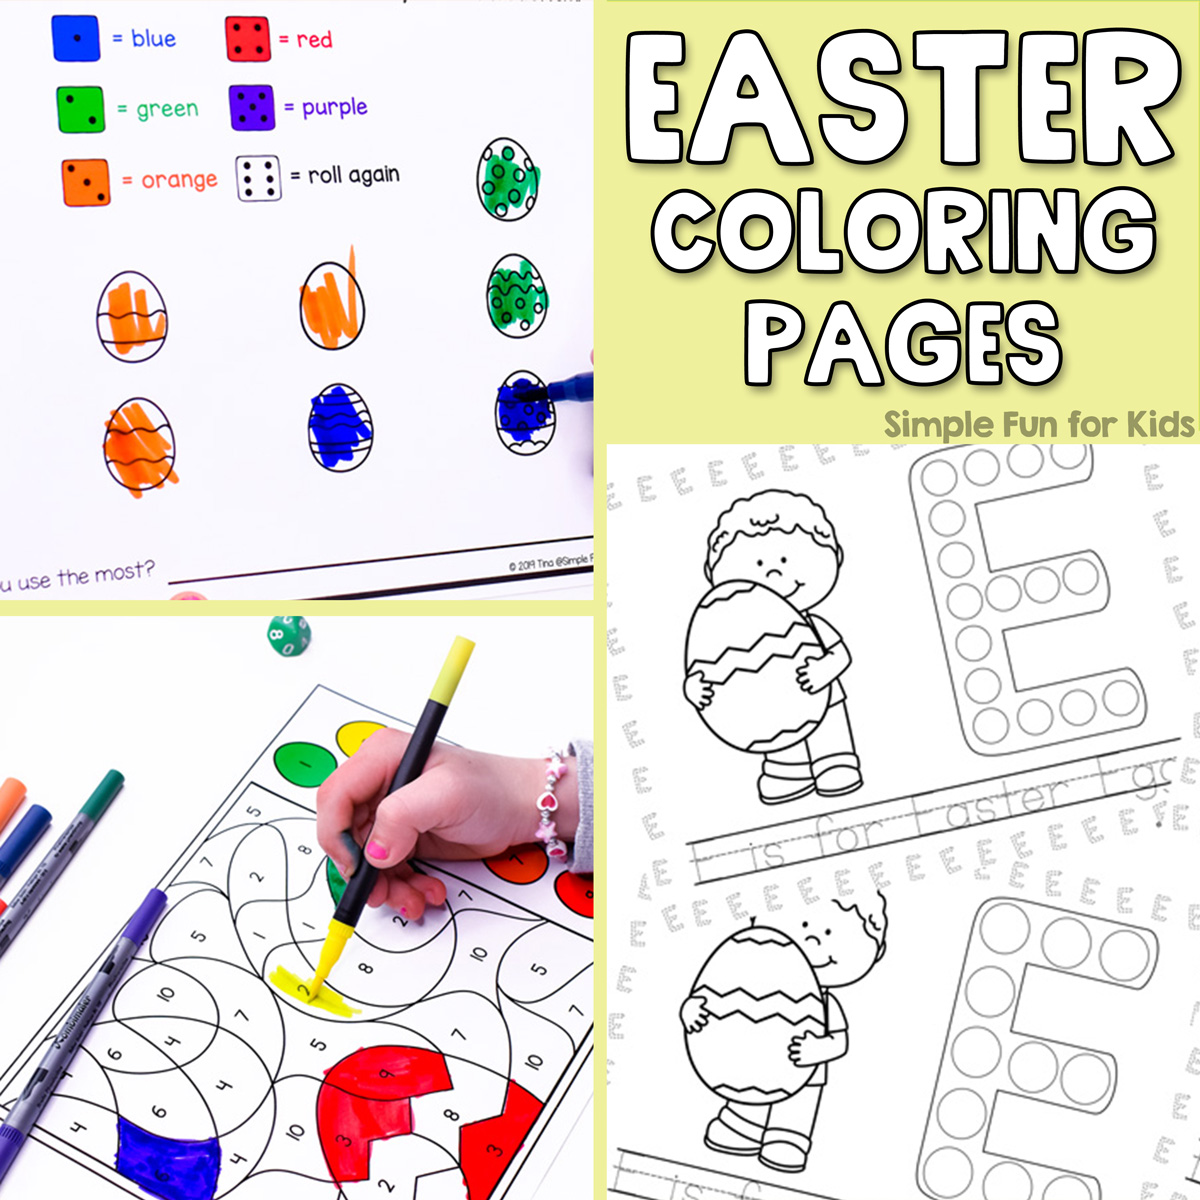 Free printable Easter coloring pages: Easter egg roll and color, color by number, dot marker coloring.